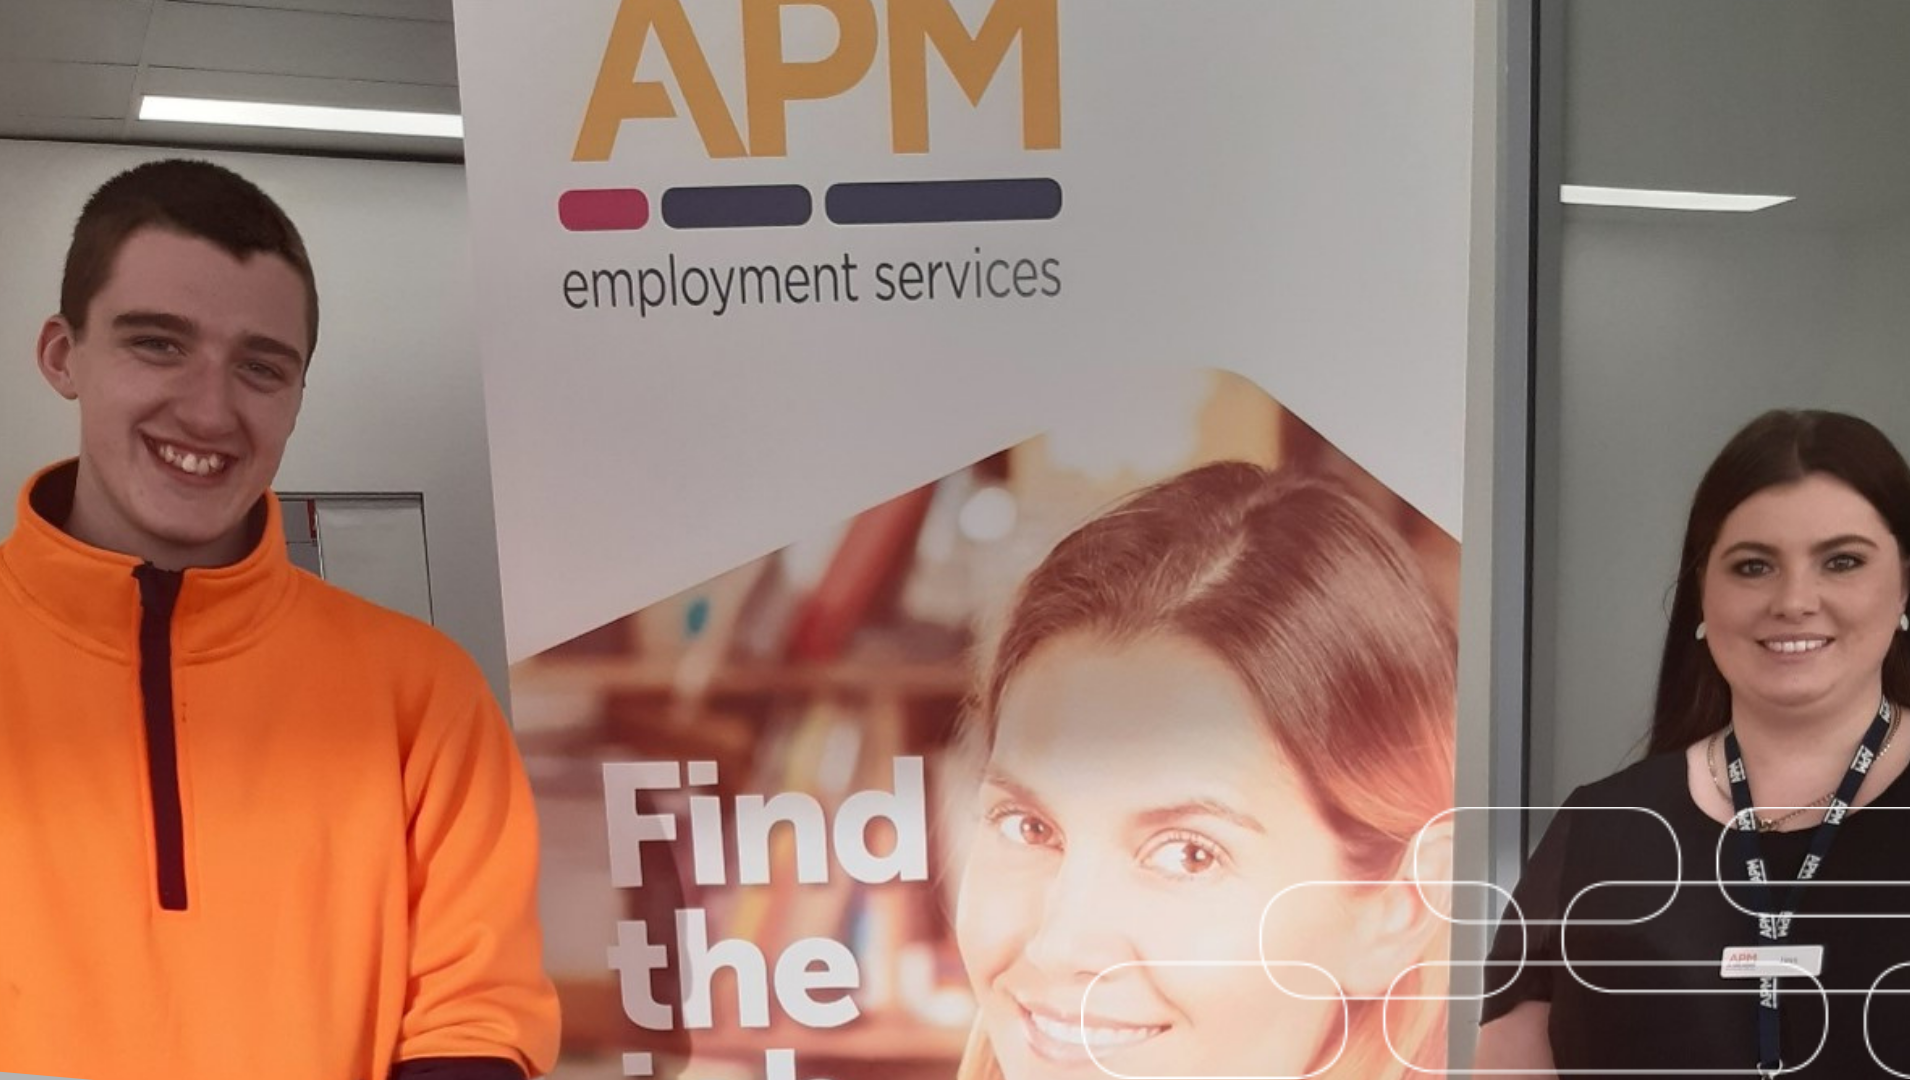 Brandon stand on the left of and APM corporate banner, flanked on the right side is his employment consultant Jess, both smiling